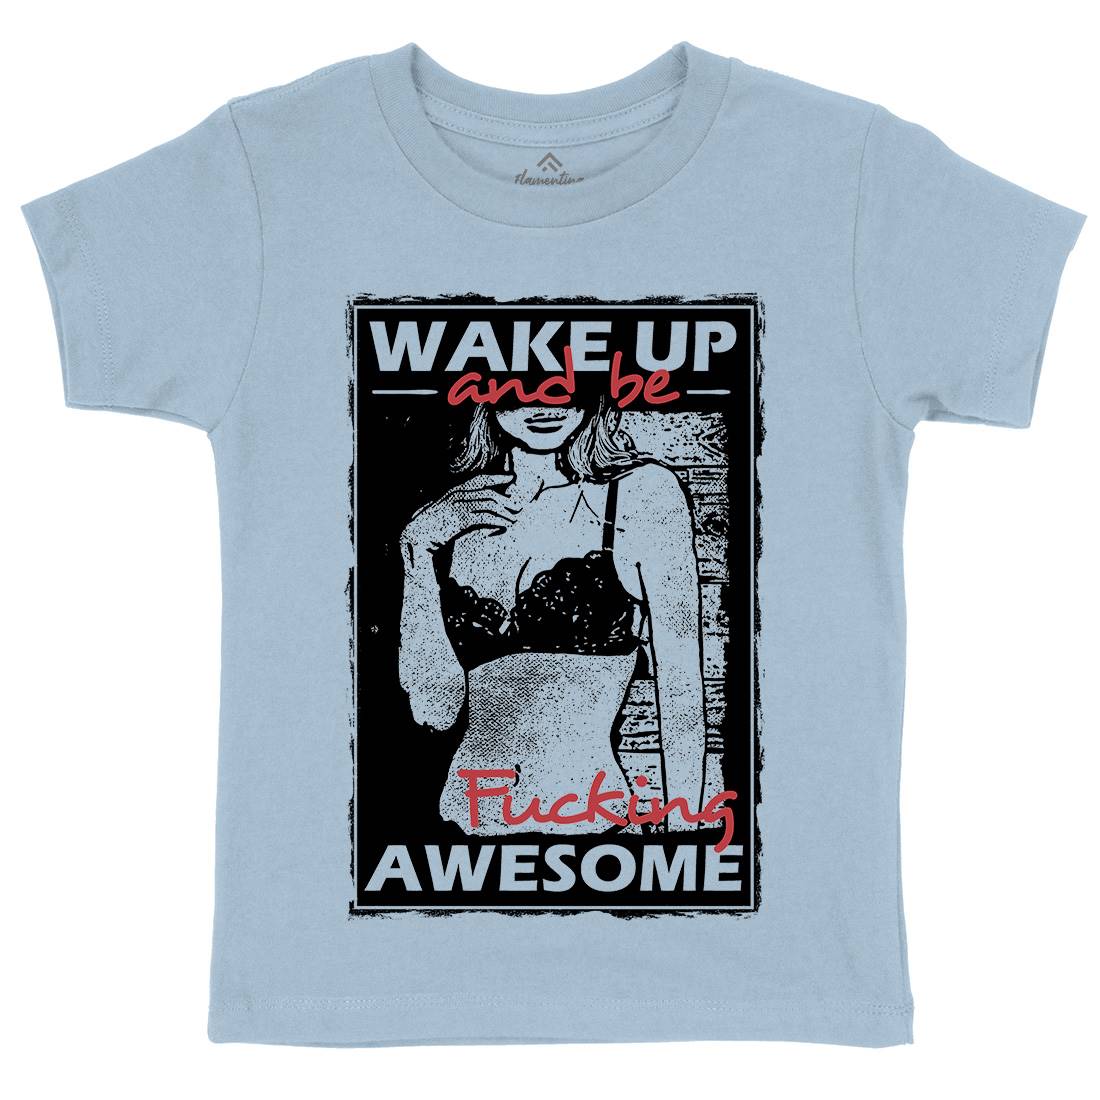 Wake Up And Be Awesome Kids Crew Neck T-Shirt Gym C993